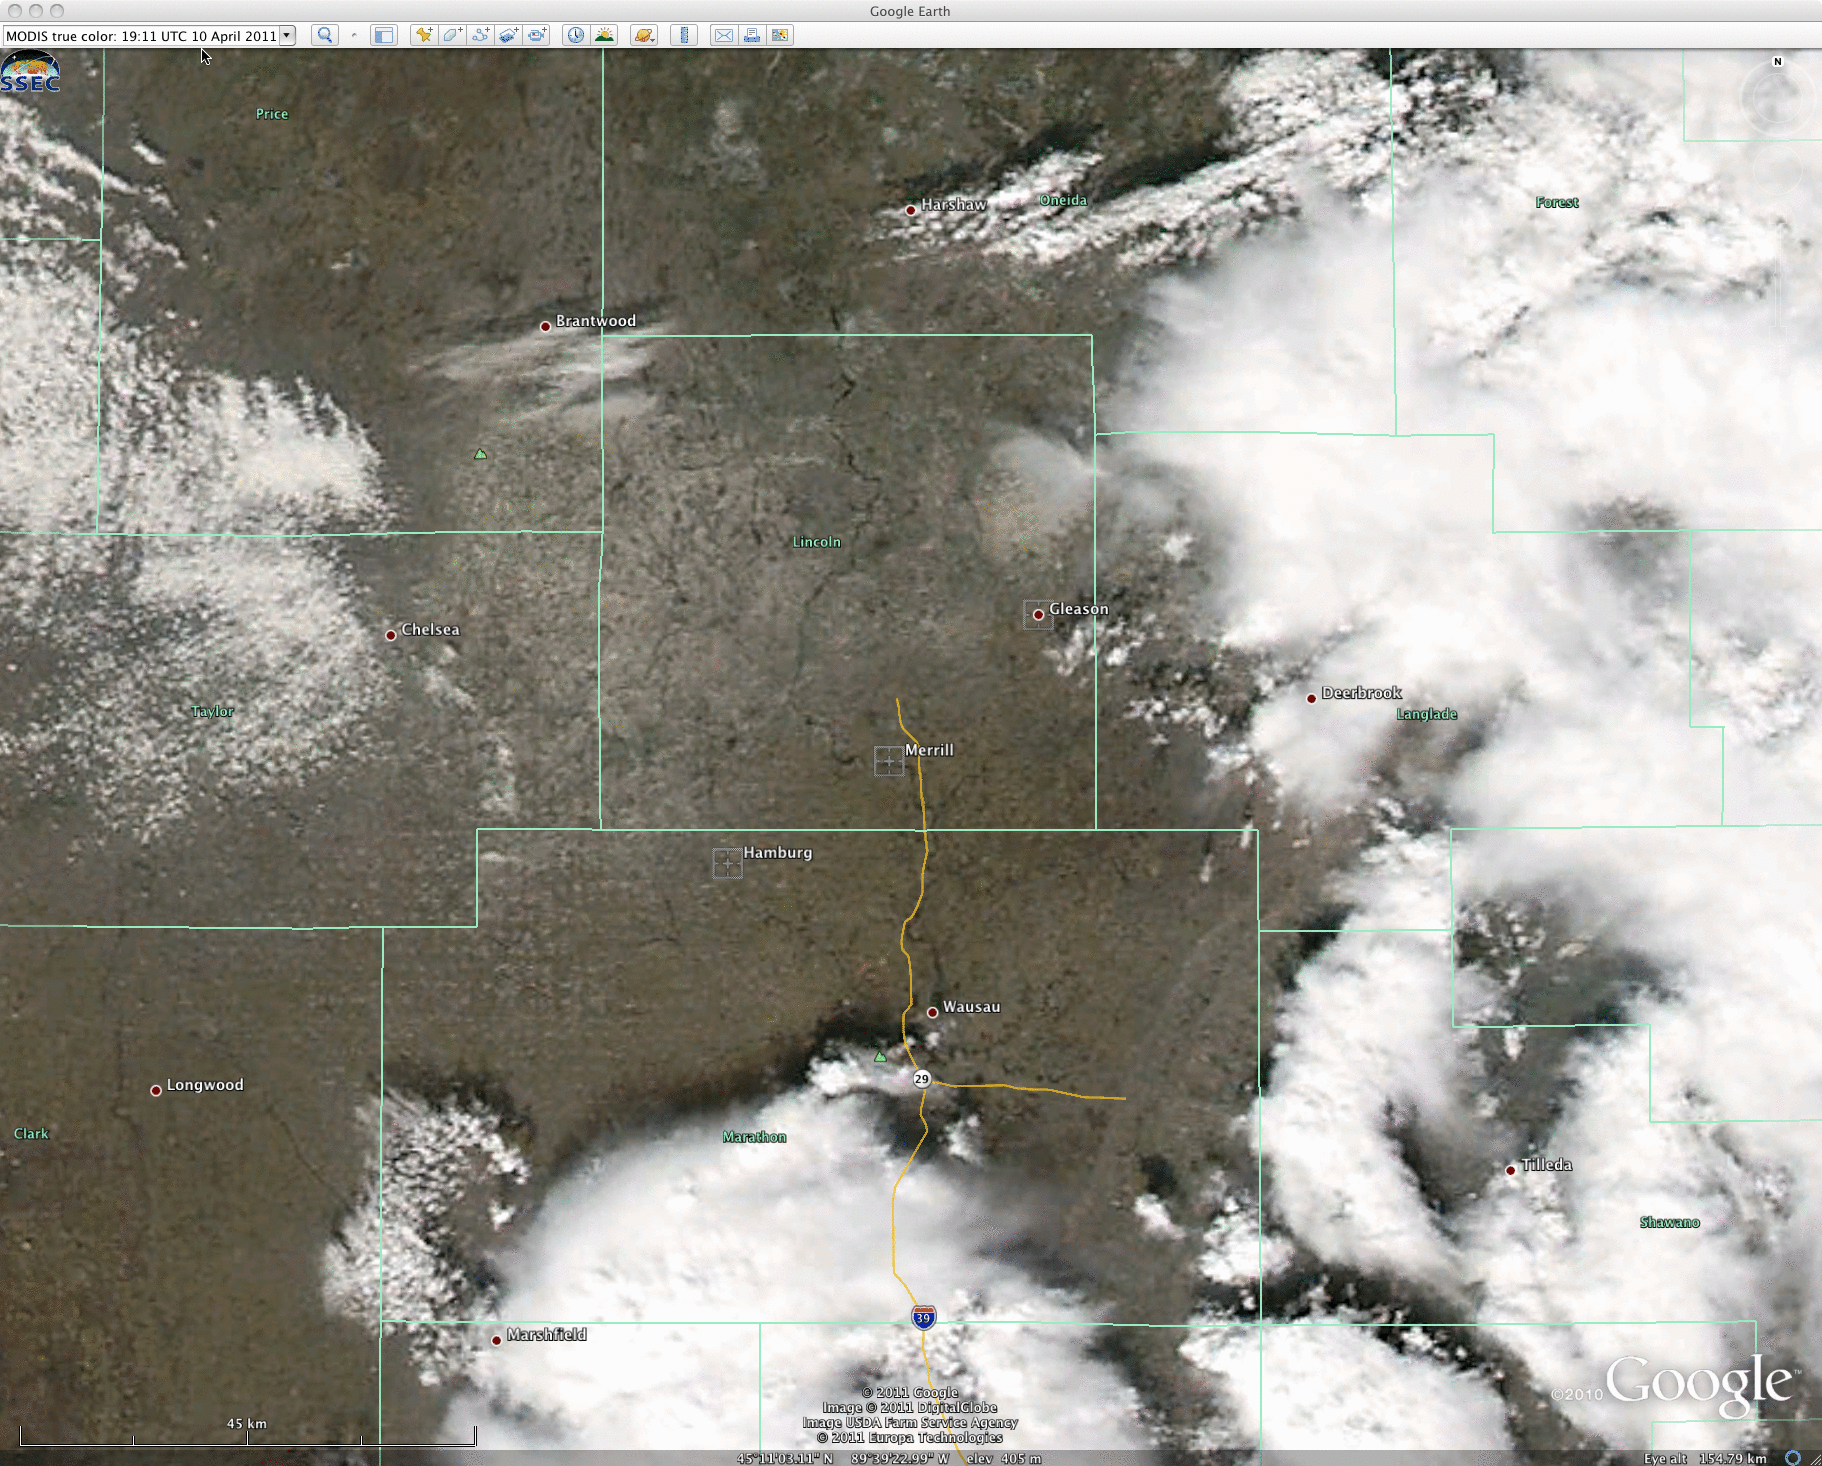 MODIS true color images on 10 April and 12 April (displayed using Google Earth)